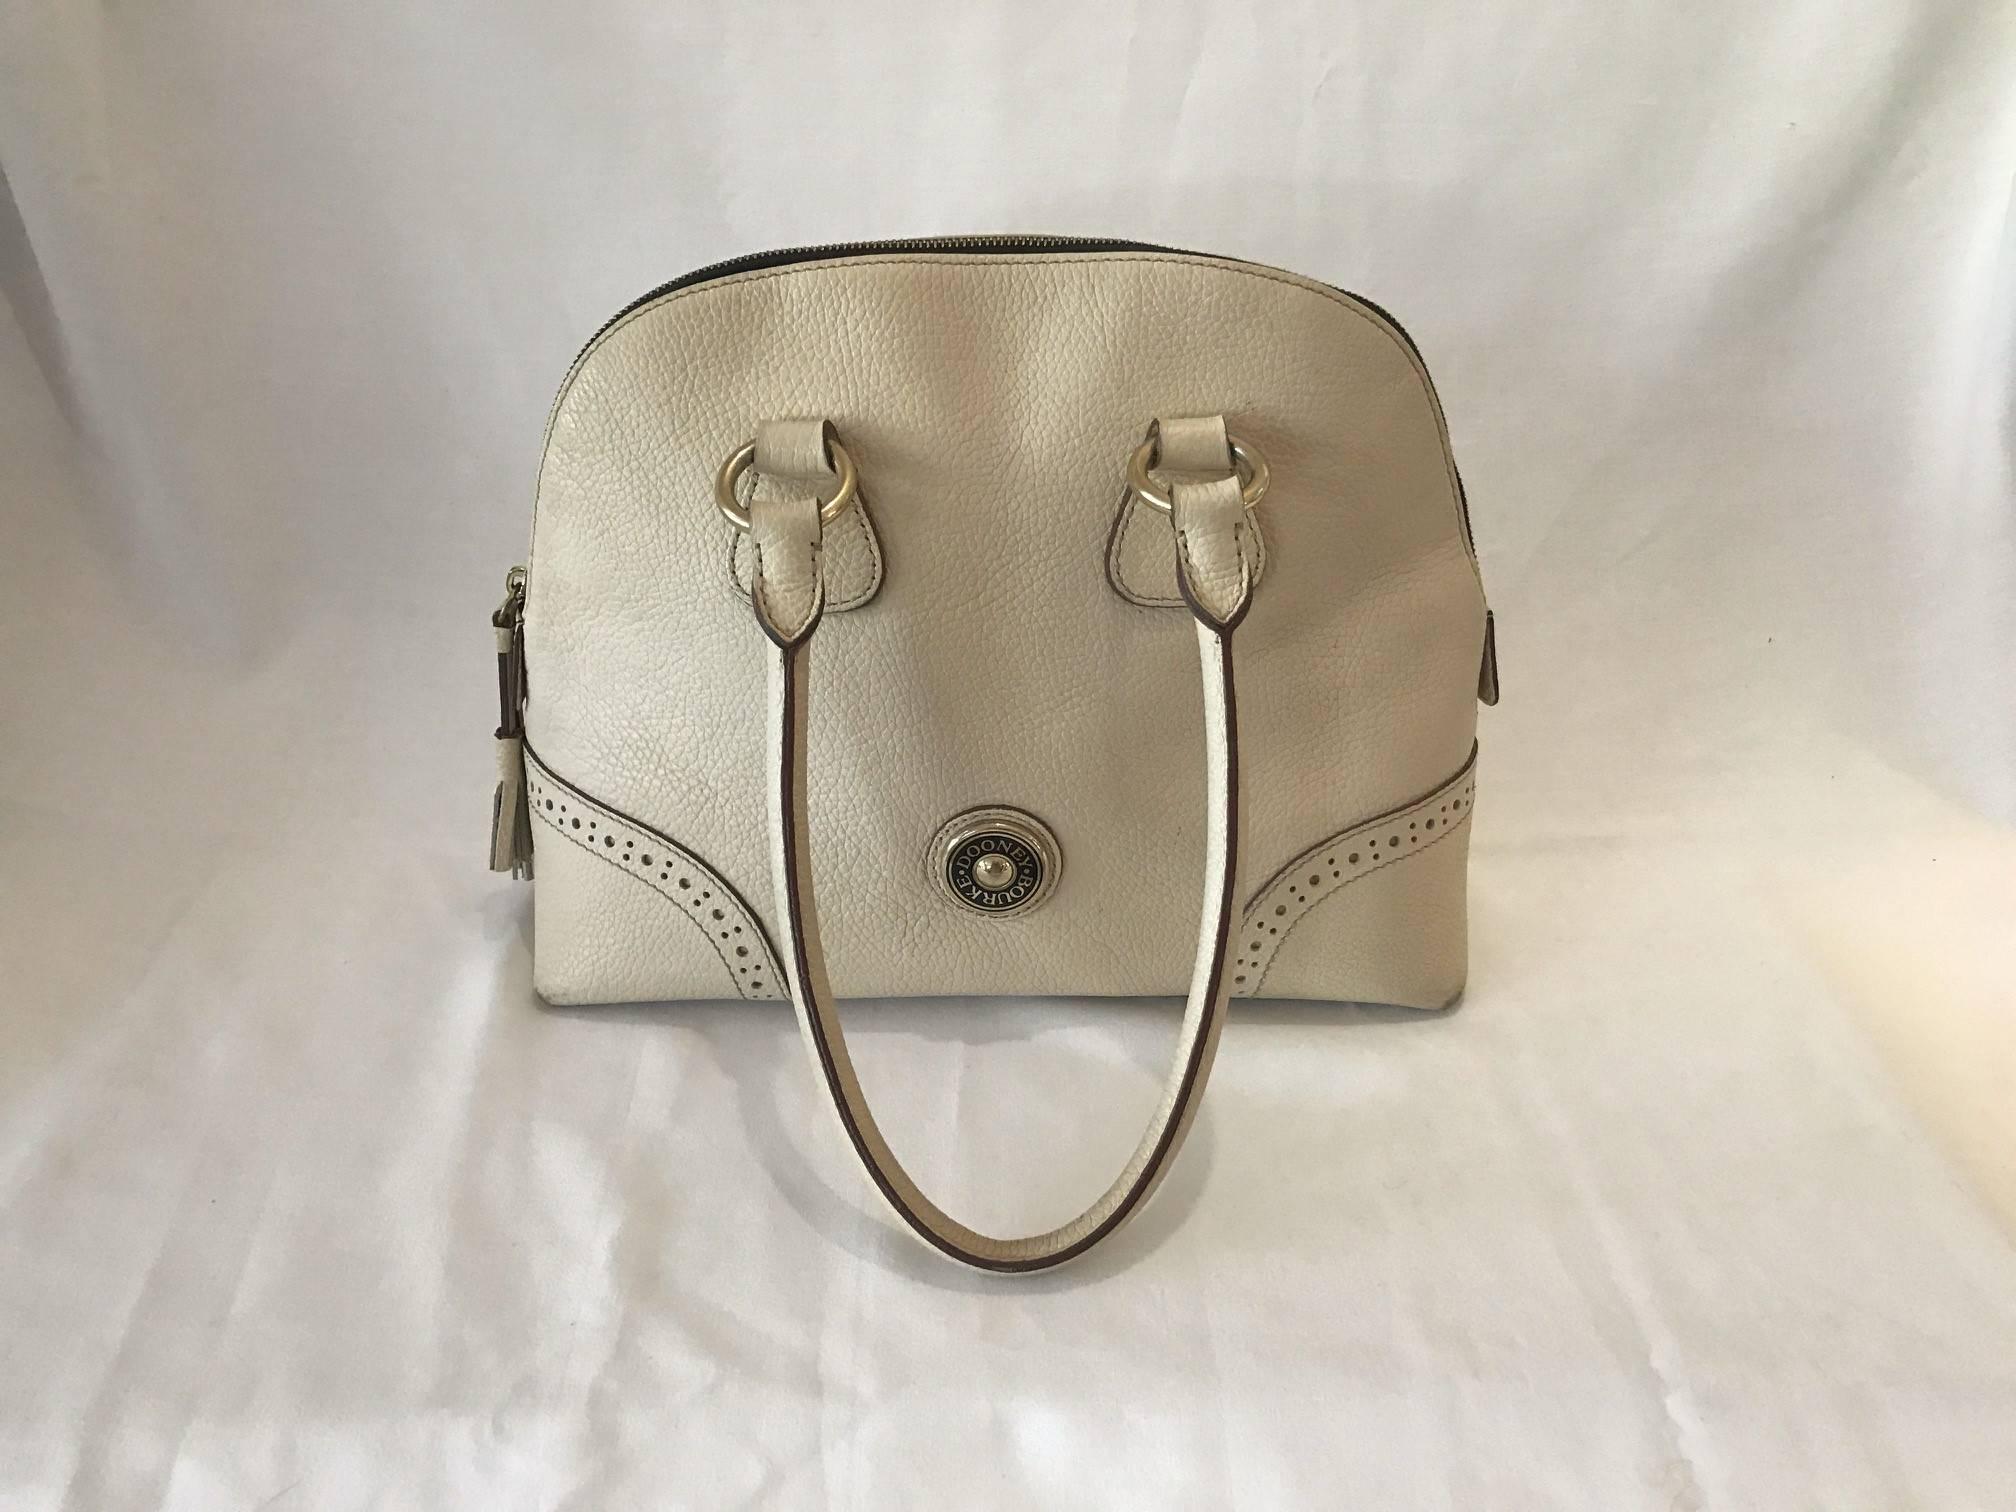 Modern Authentic Creme Colored Dooney Bourke Leather Hand Bag, Clean, Rarely Used For Sale